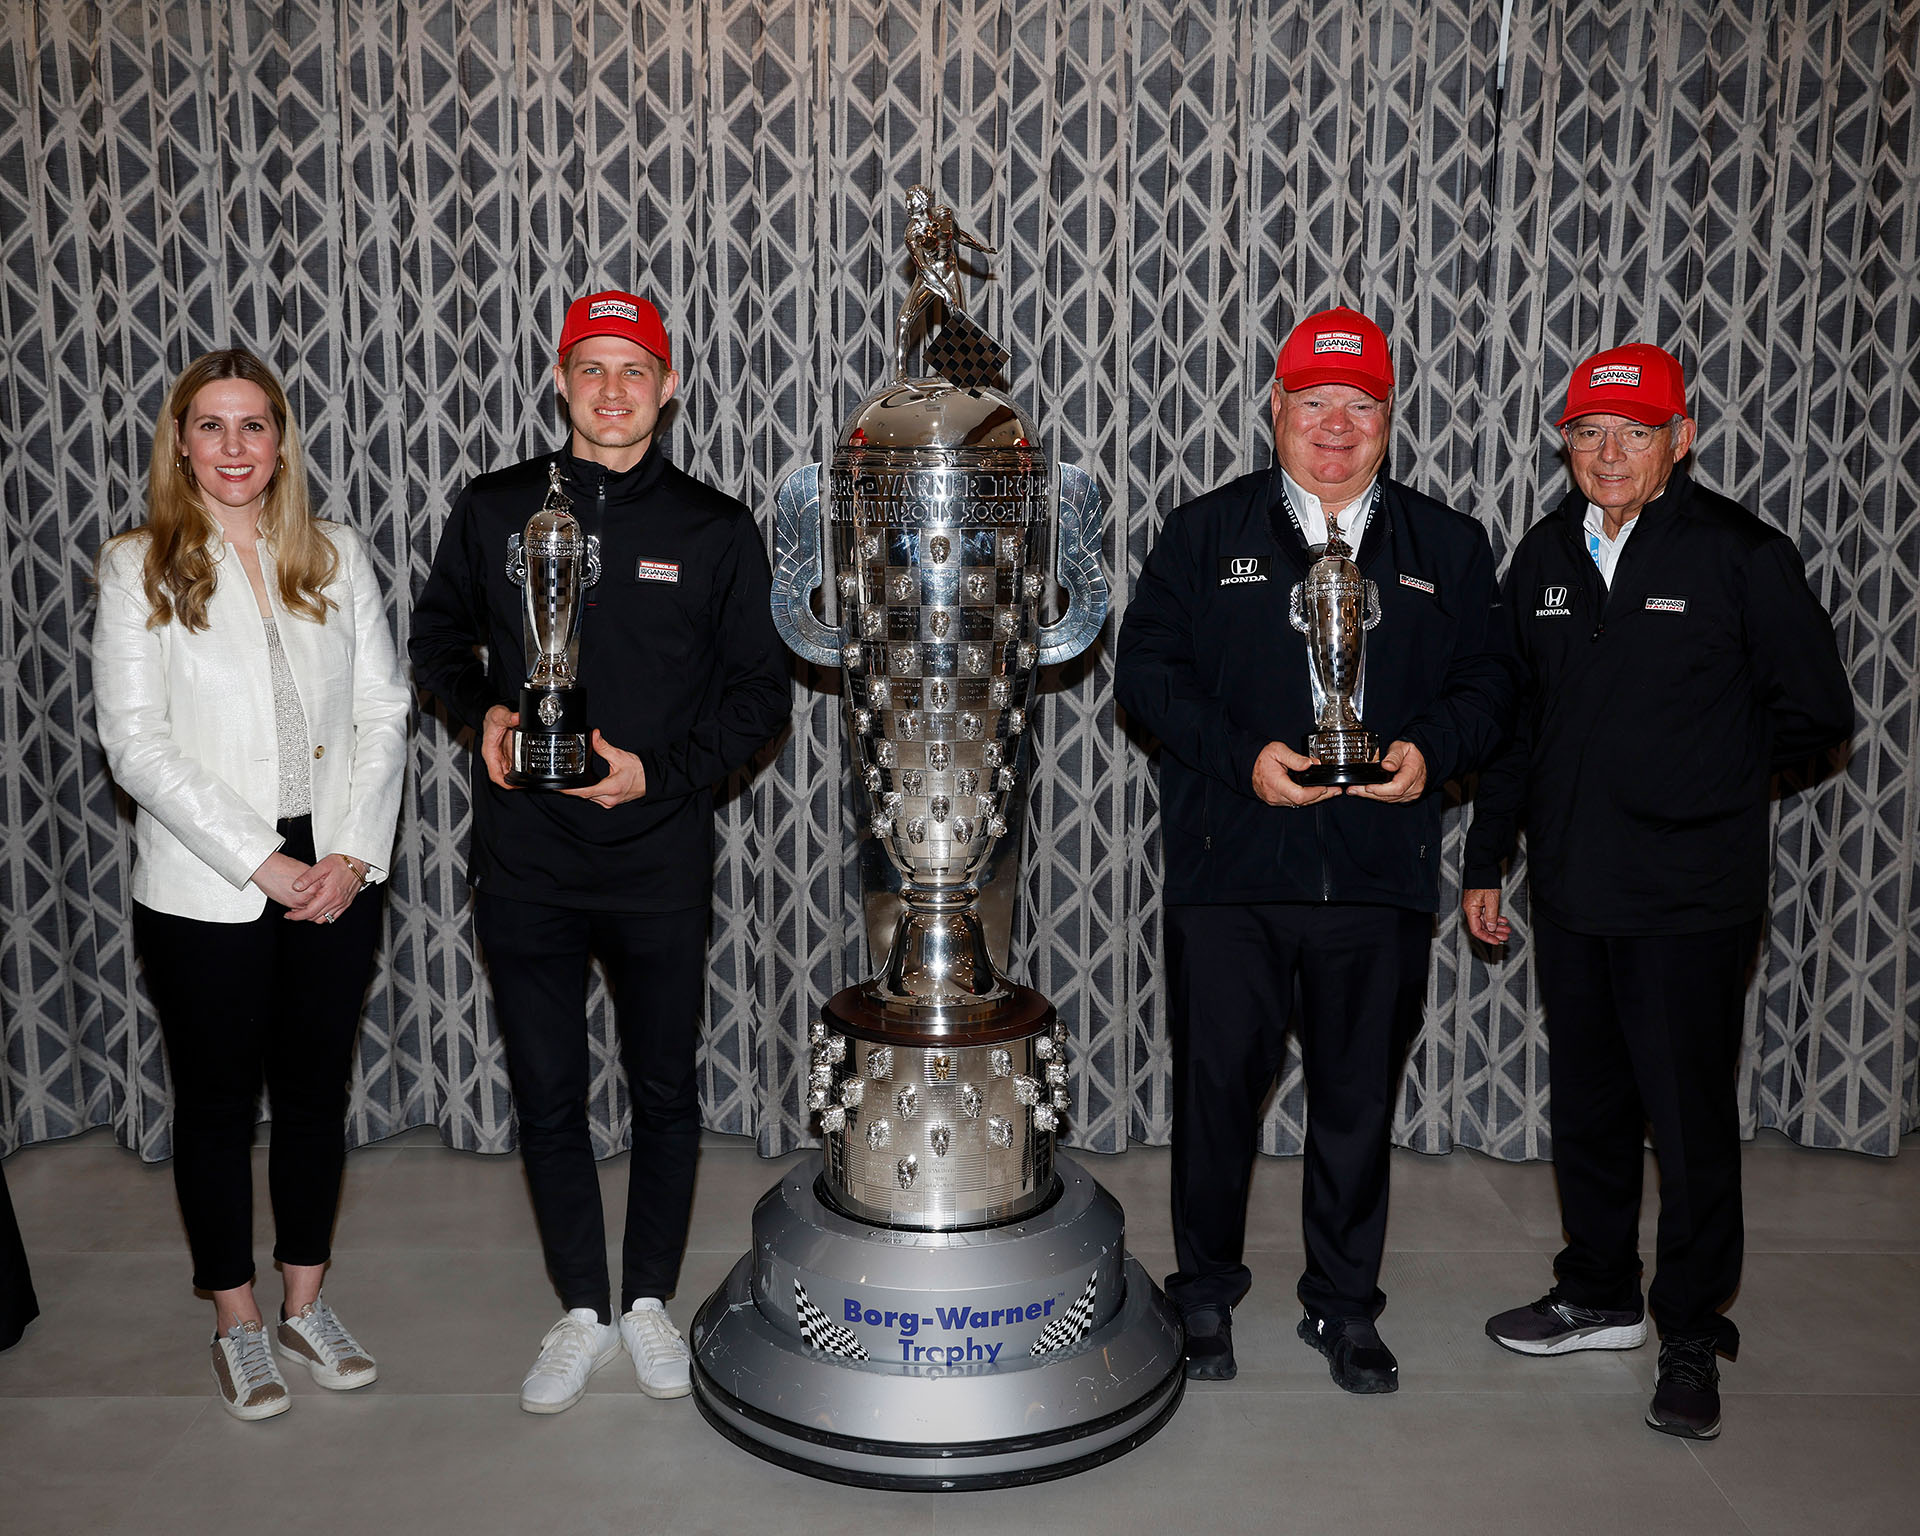 Four people stand in line next to large silver trophy while smiling